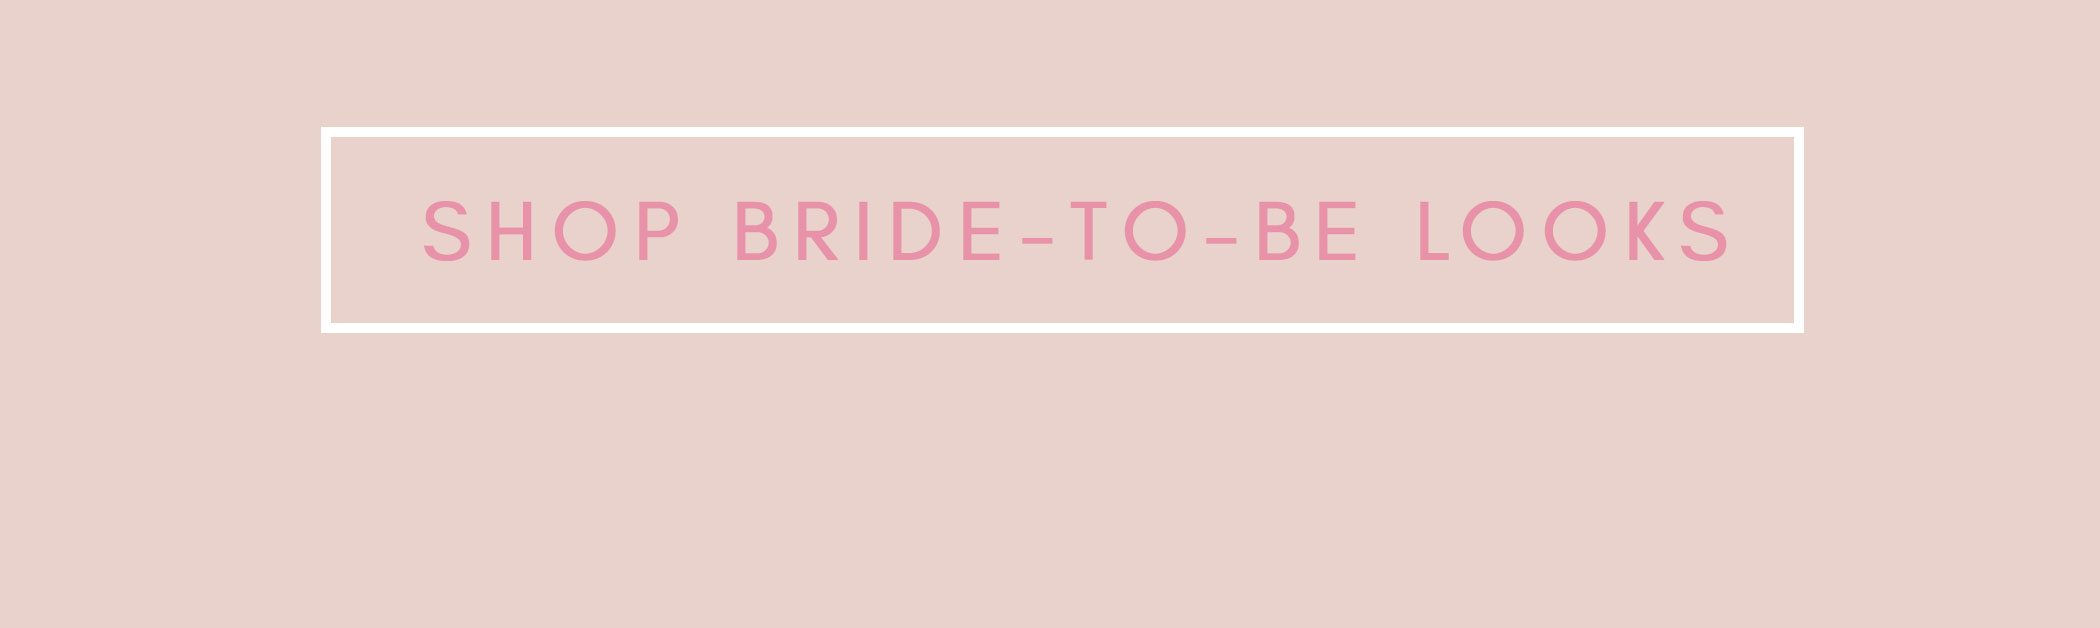 bride to be styles